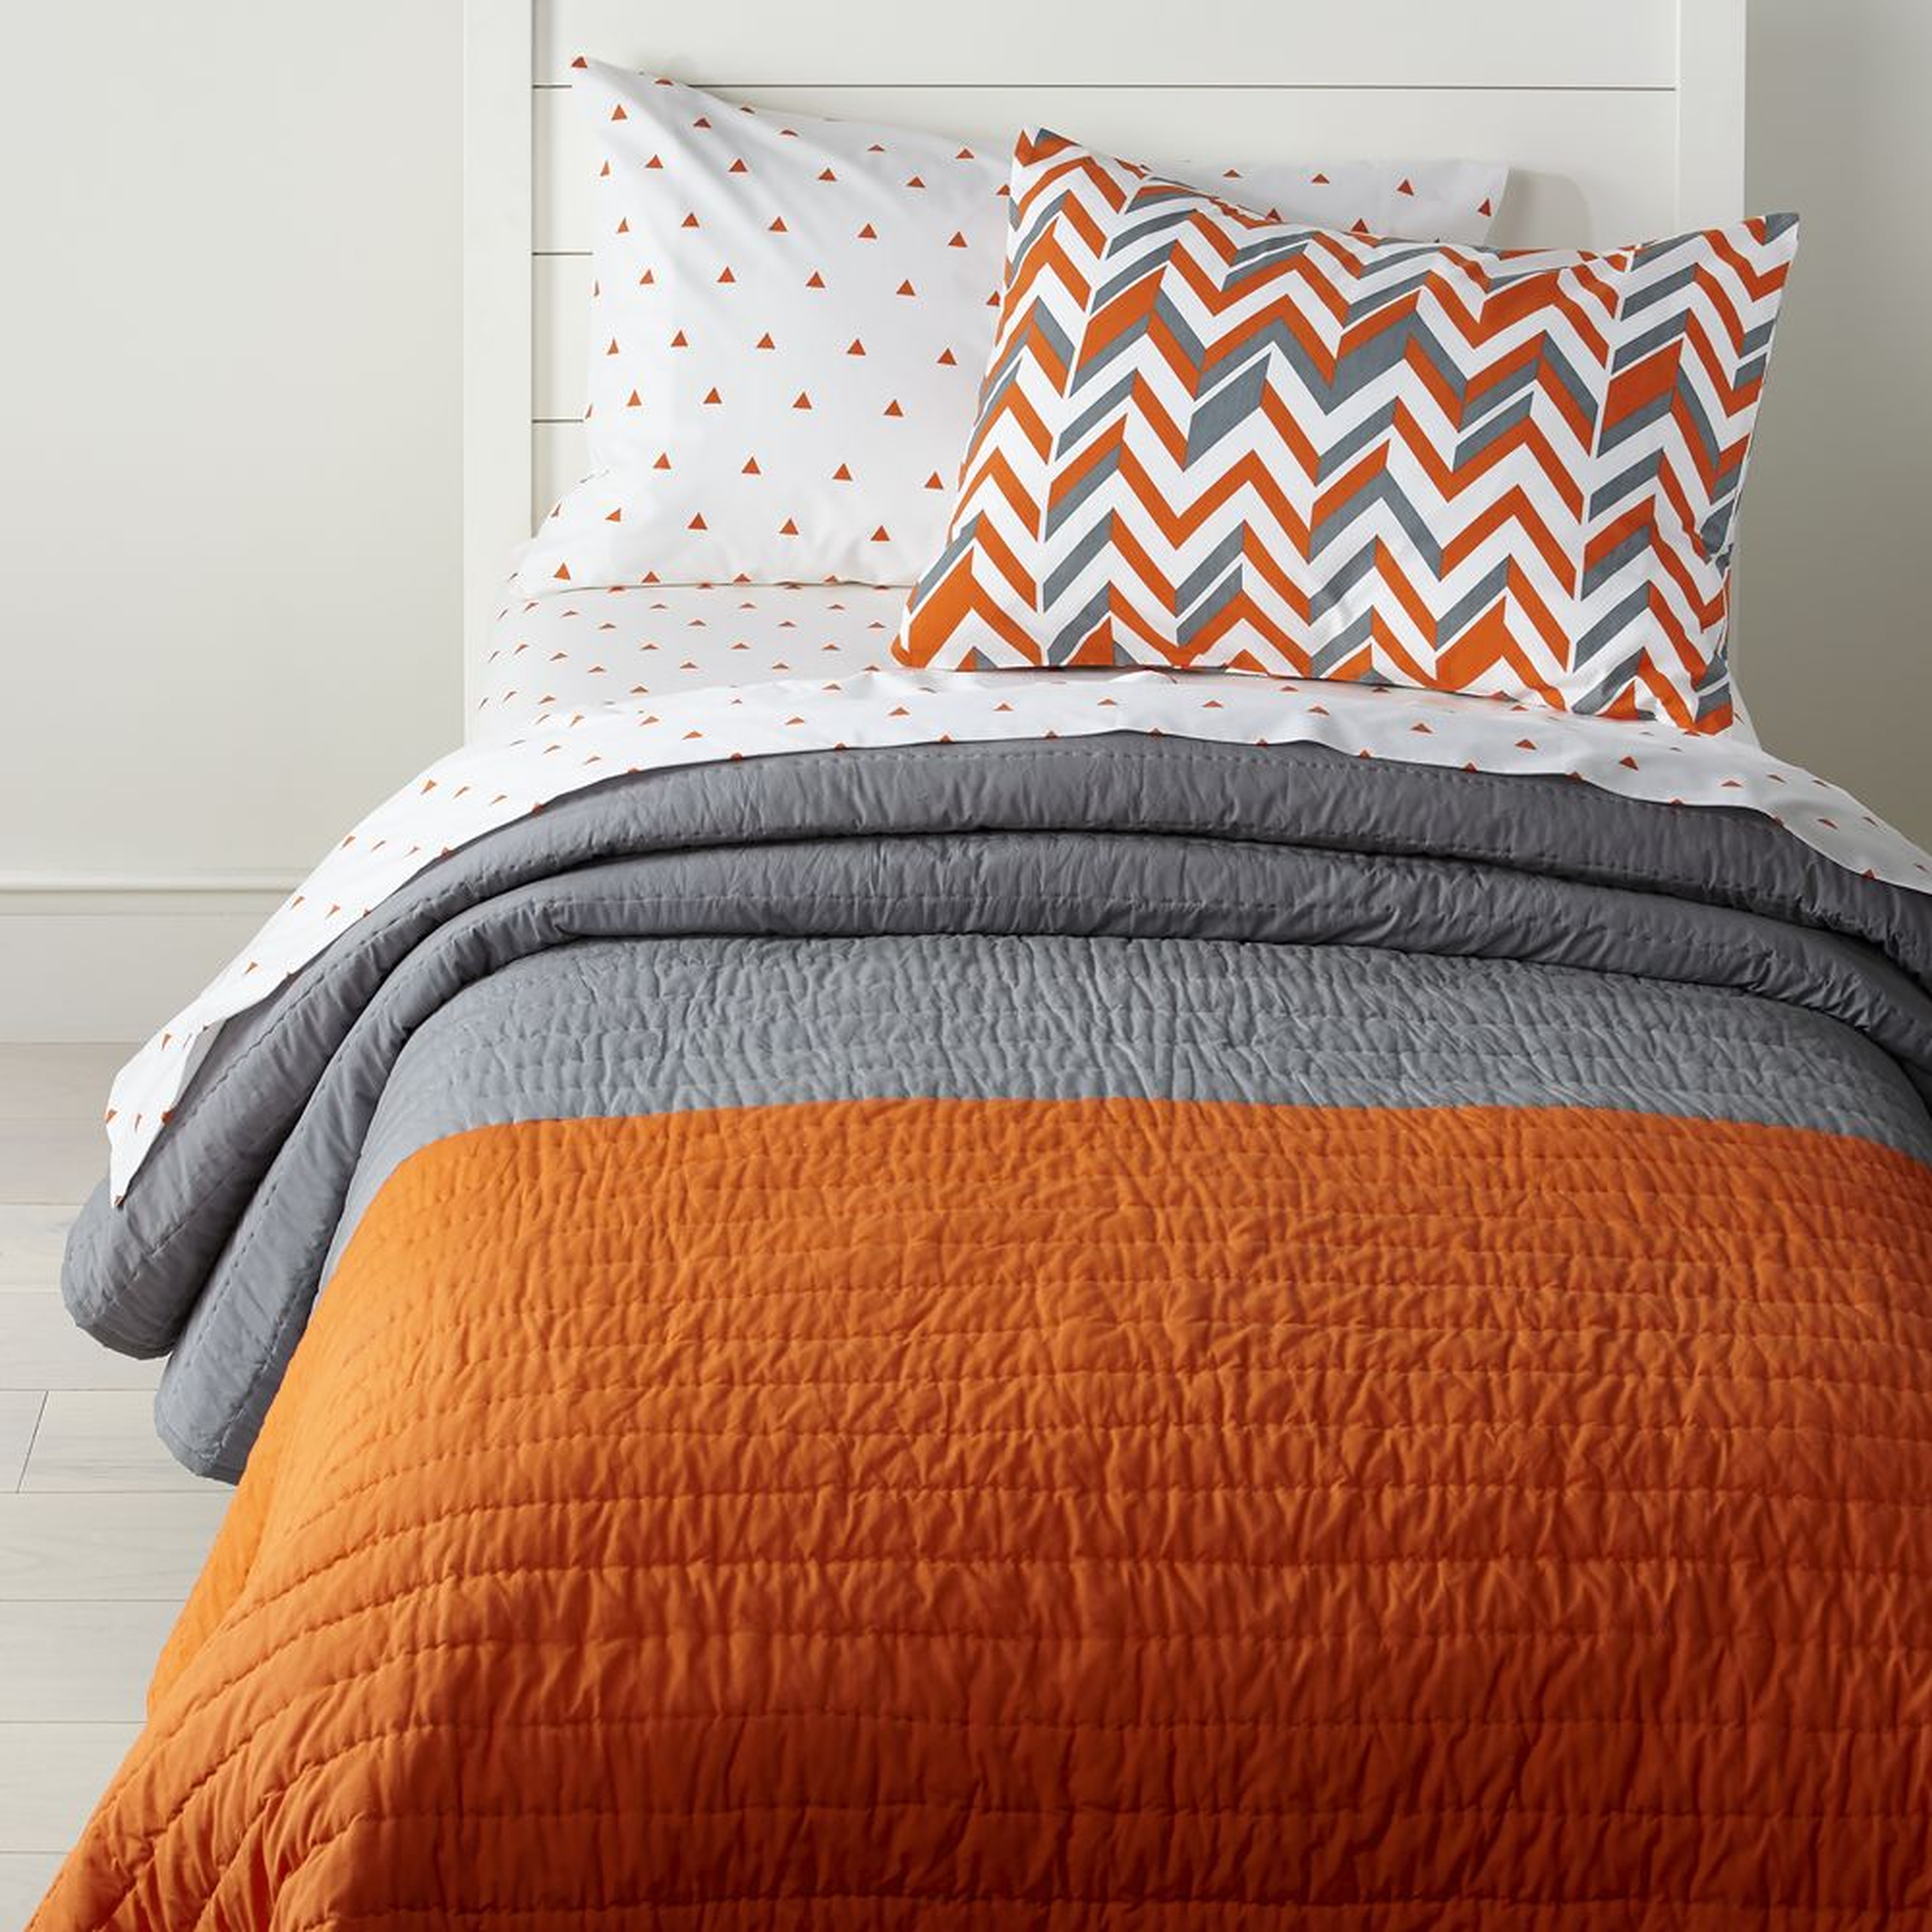 Little Prints Orange Twin Quilt - Crate and Barrel